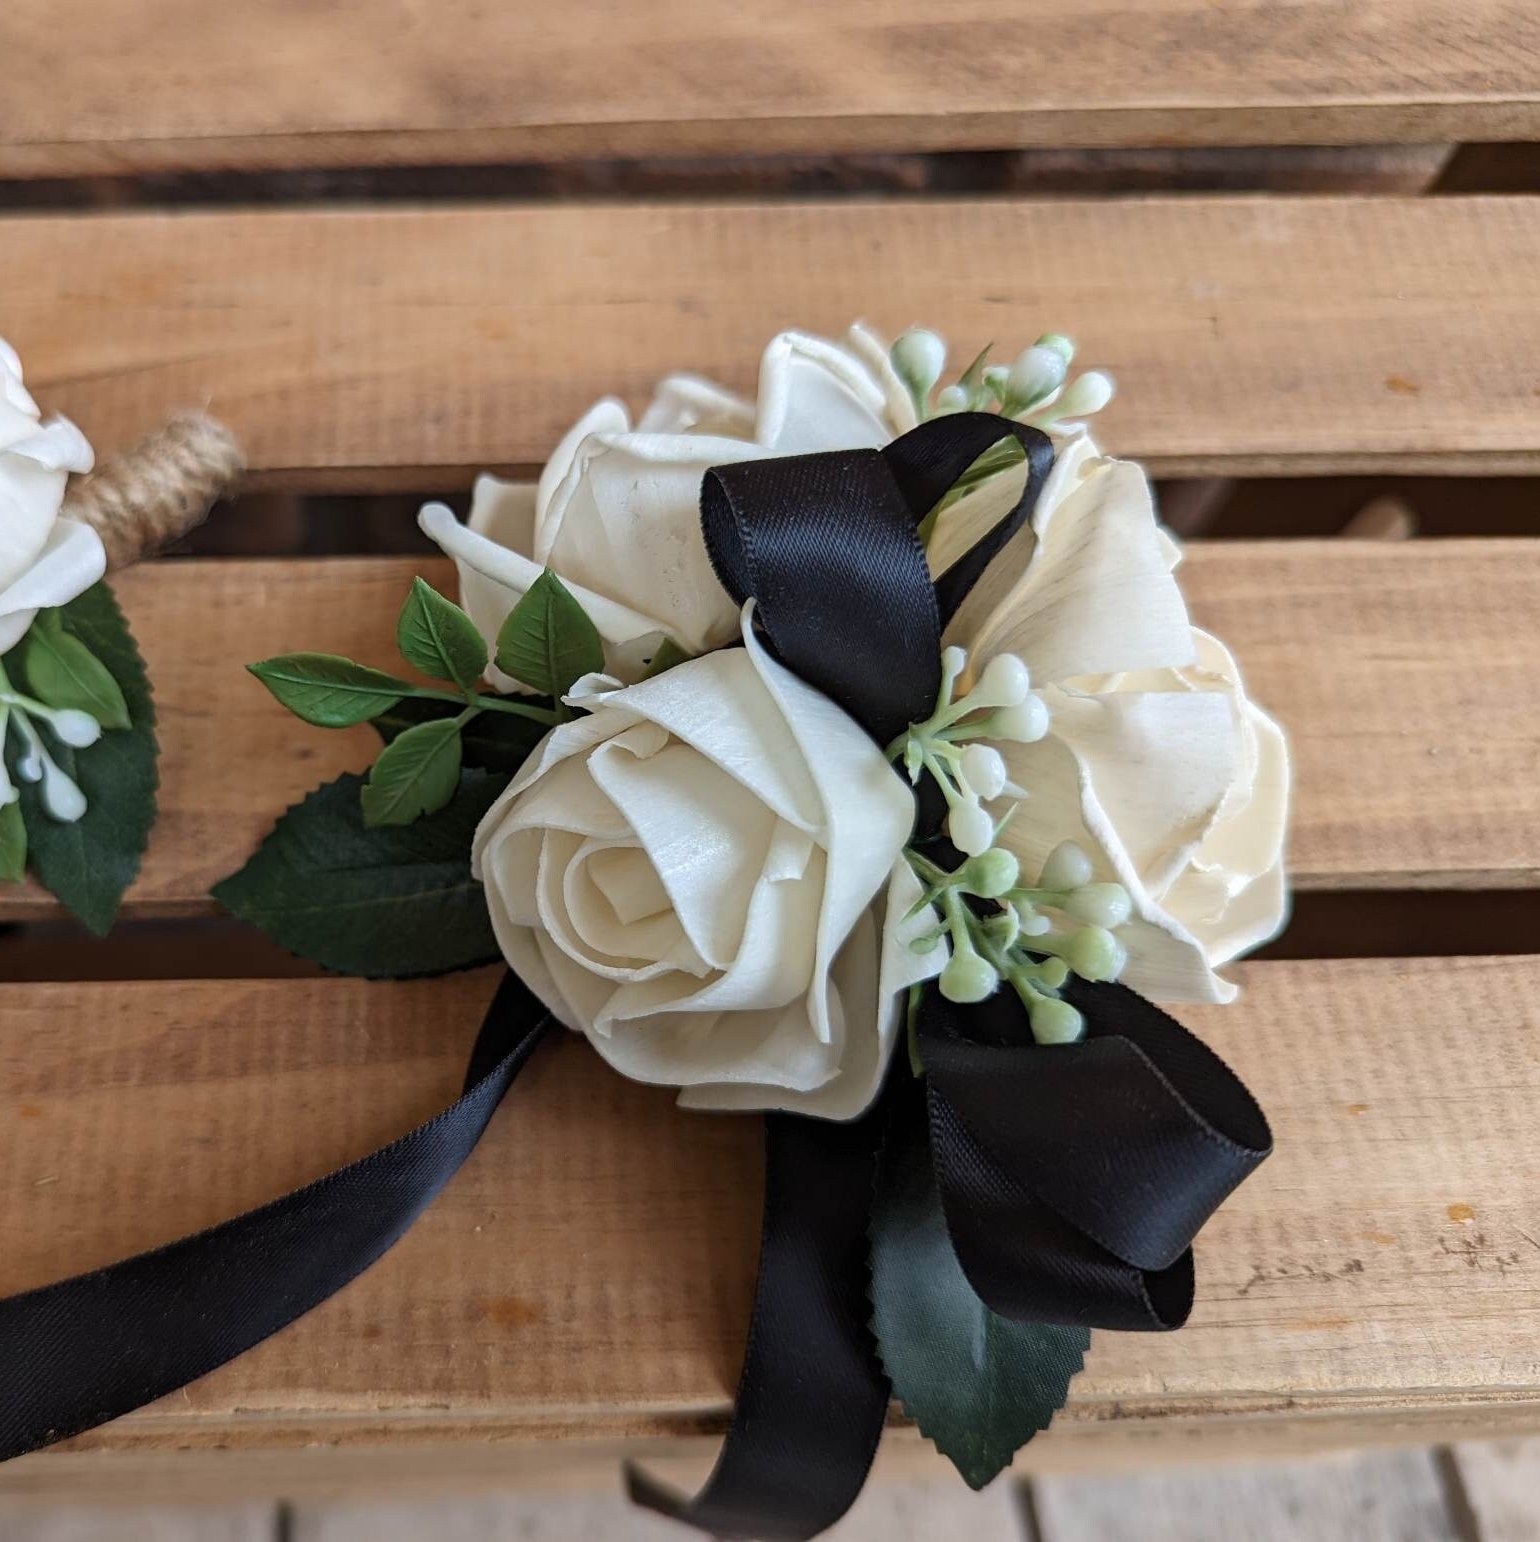 Corsage and Boutonniere Set with Wood Flowers, Prom Corsage and Boutonniere, Prom Flowers, Bridesmaid Wrist Corsage, Wedding Flowers